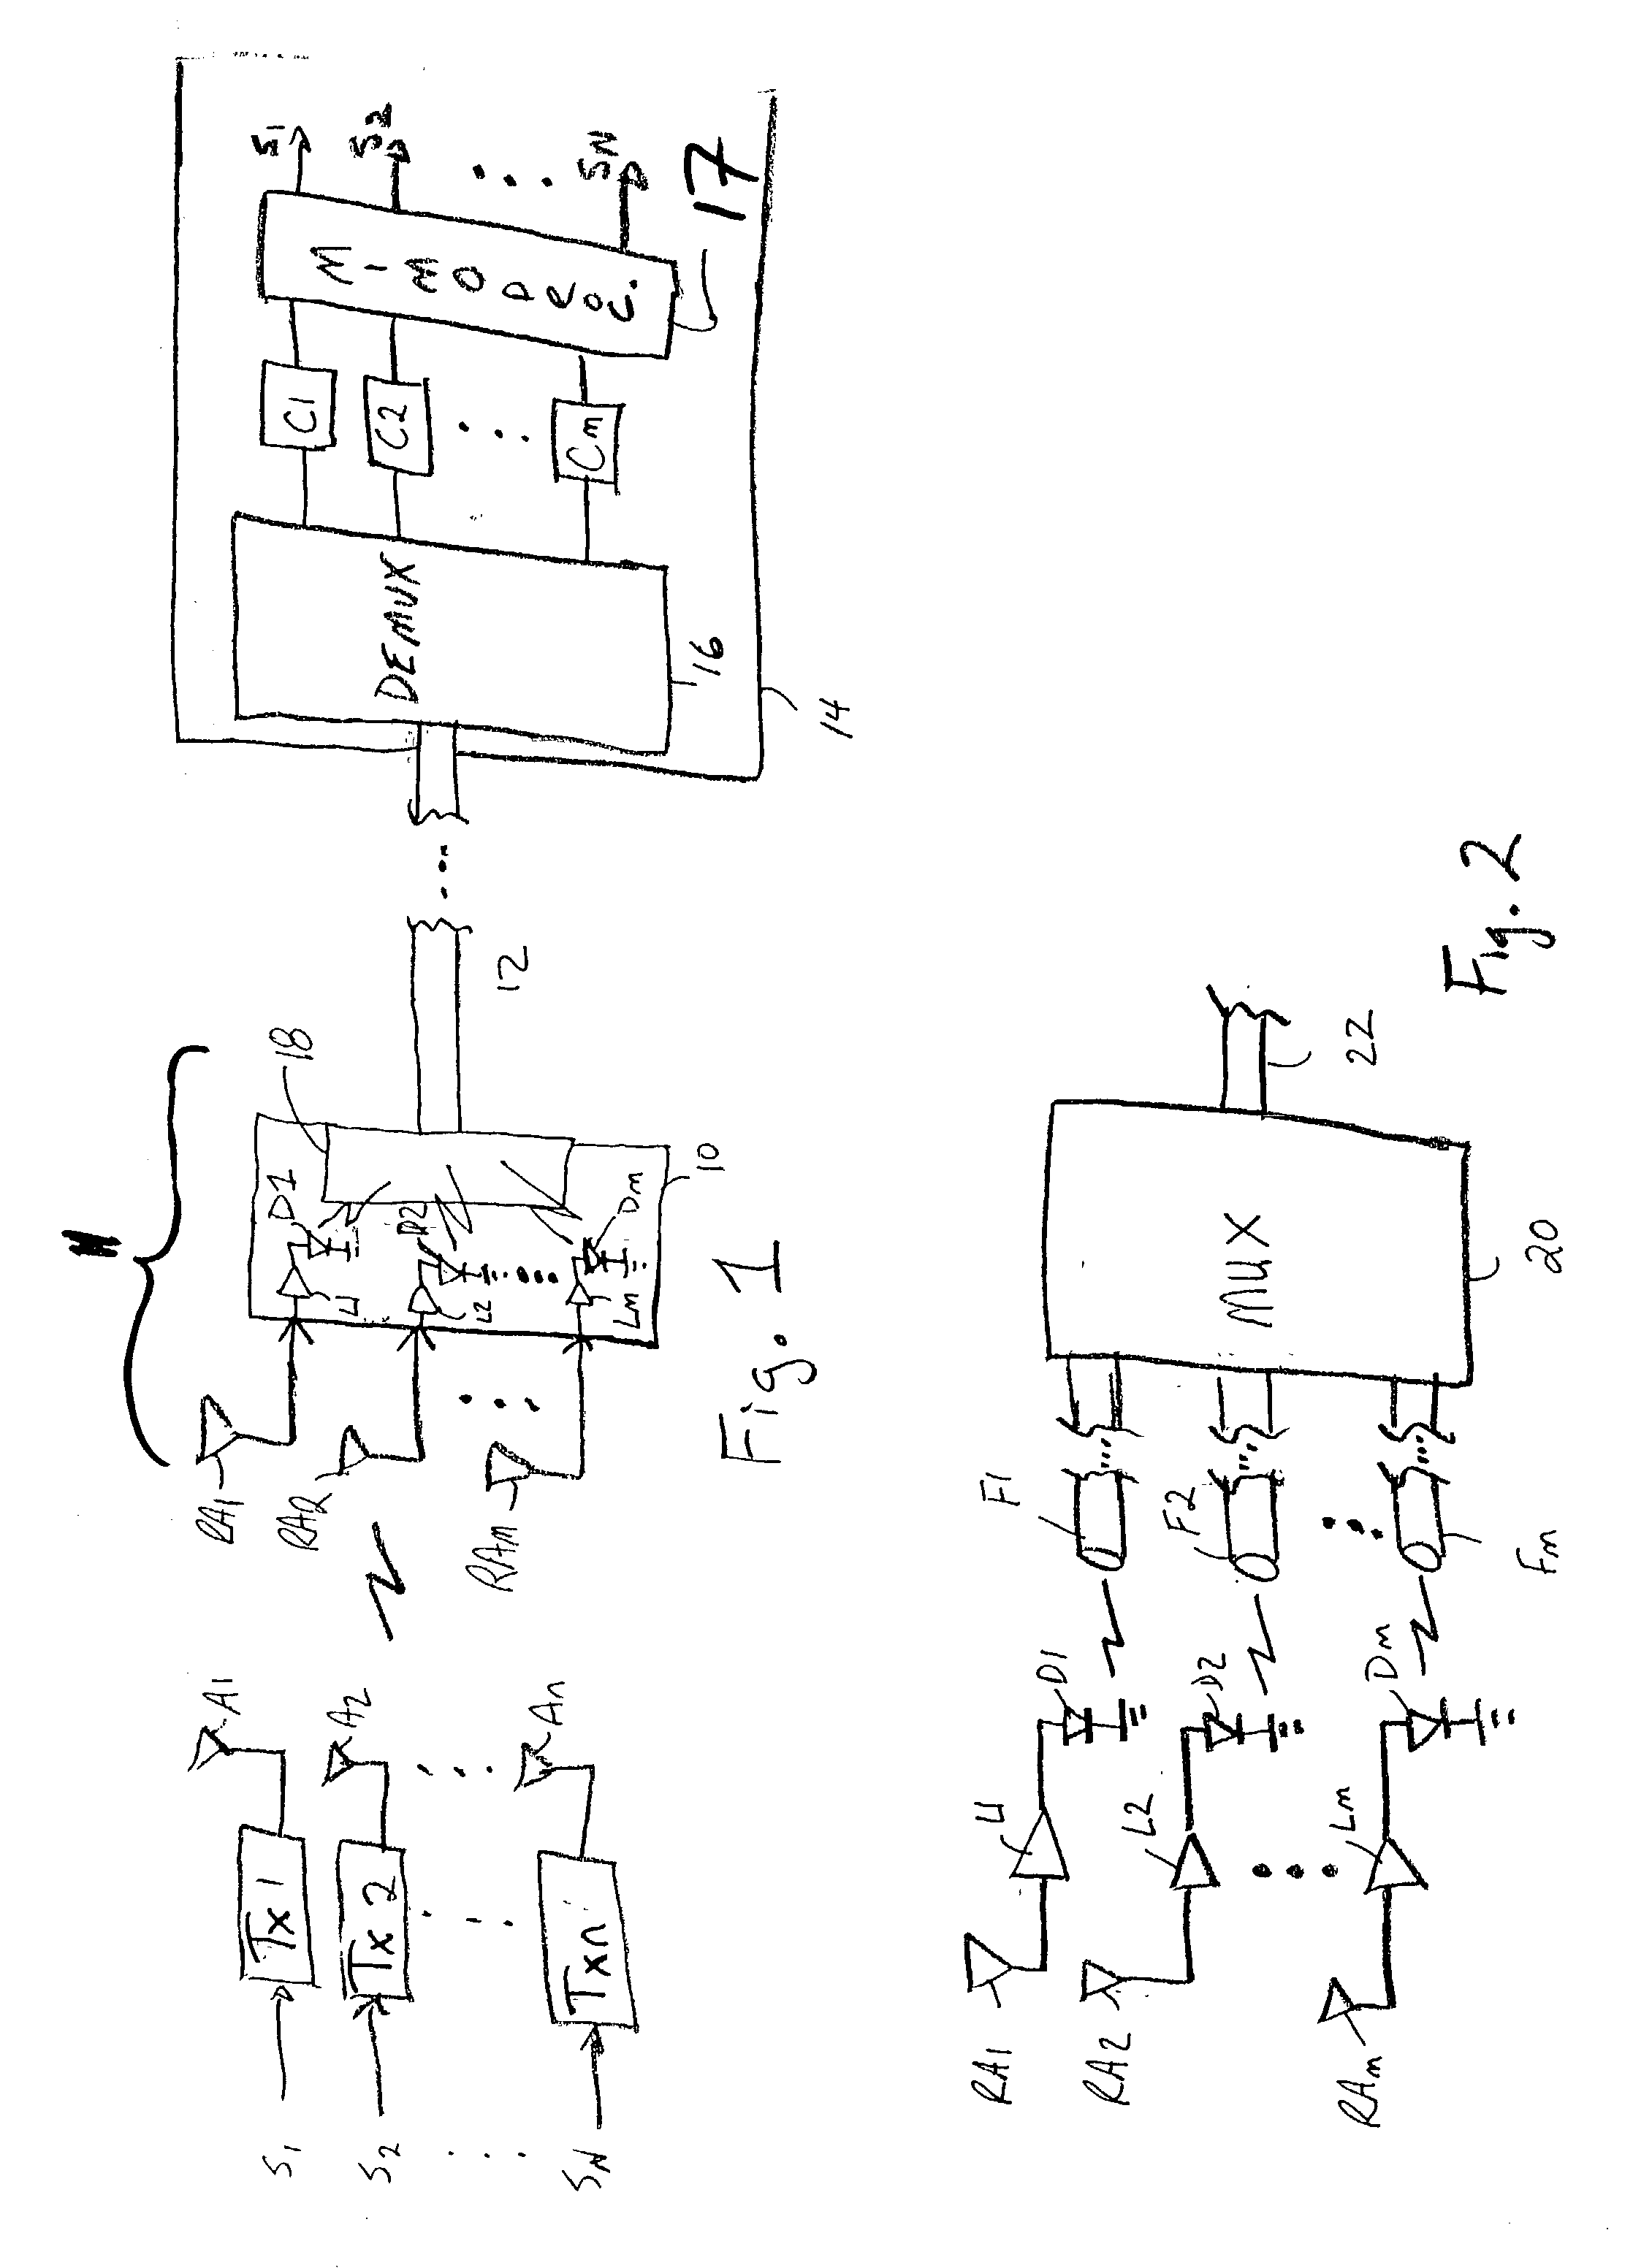 System for transporting multiple radio frequency signals of a multiple input, multiple output wireless communication system to/from a central processing base station